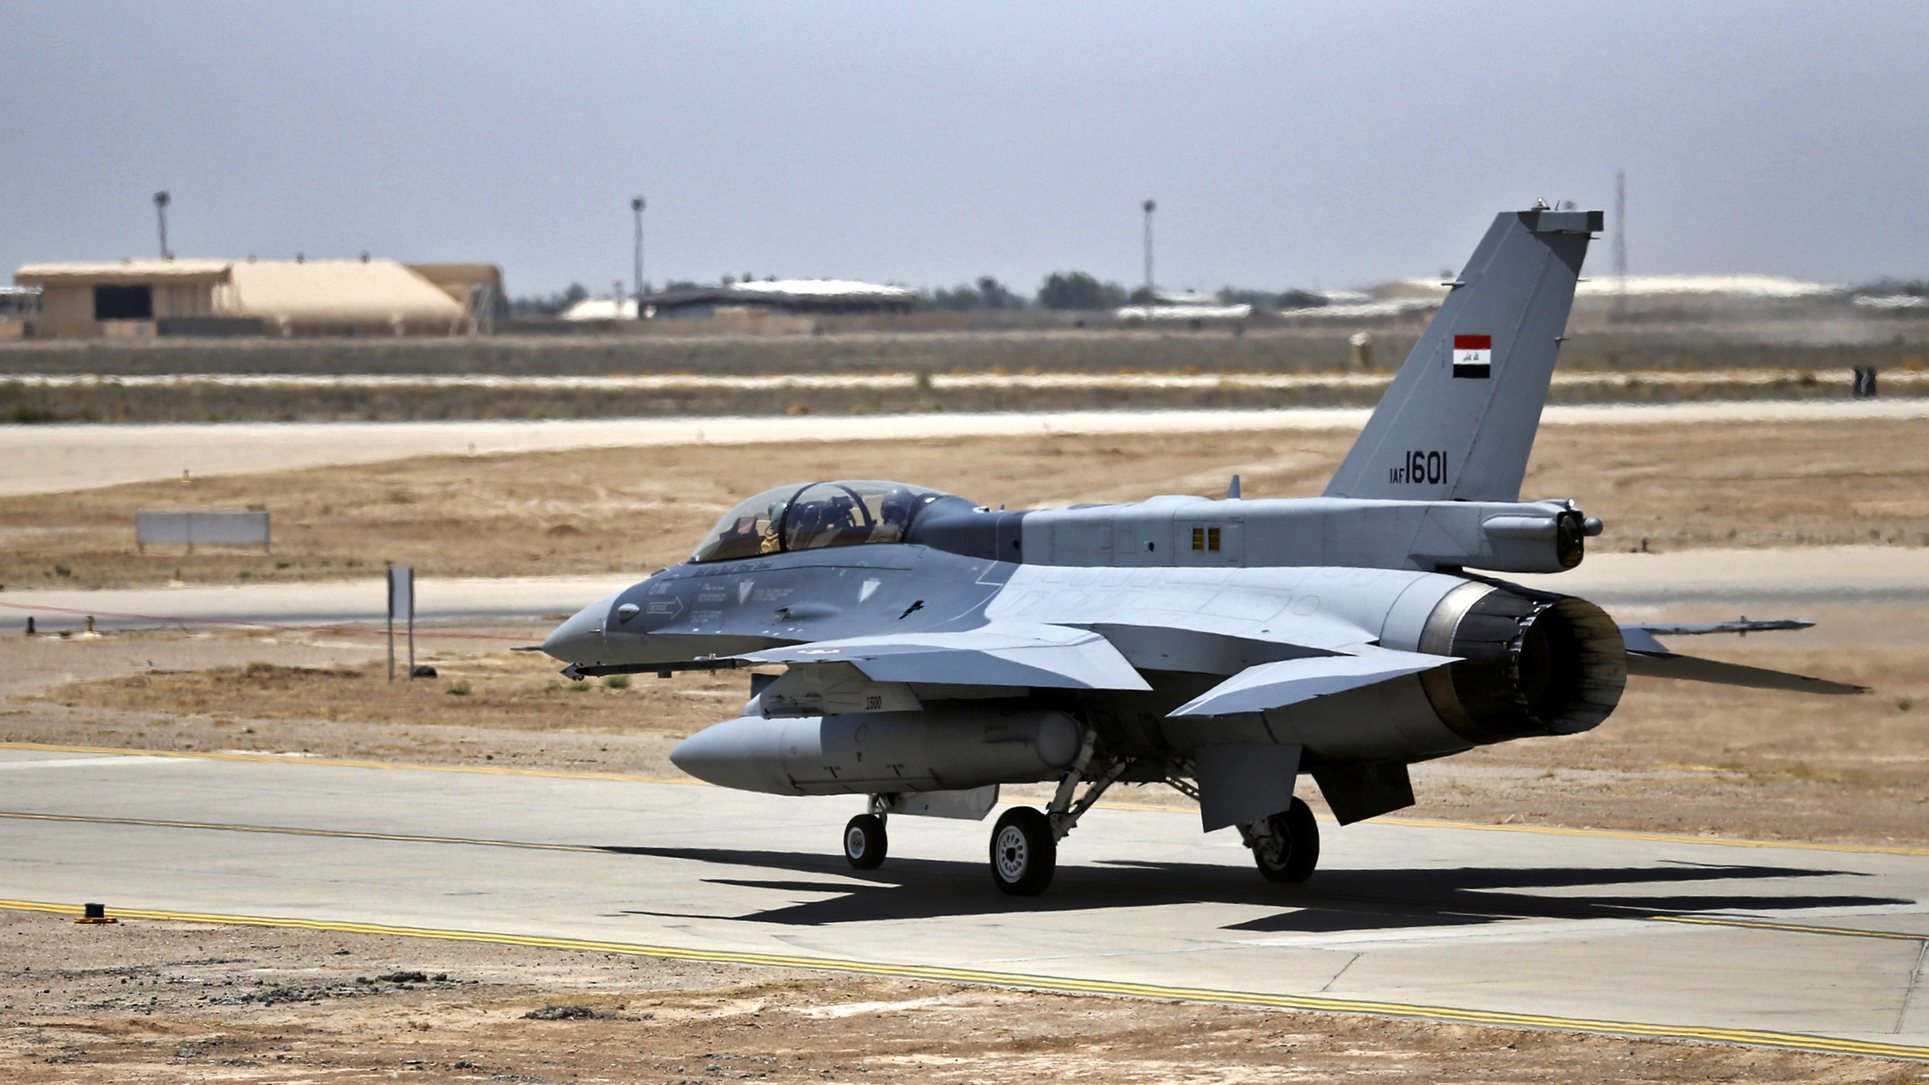 epa08123040 (FILE) - One of four F-16 fighter jets sits on a runway during the delivery ceremony in Balad Air Base in Salahuddin province, northern Iraq, 20 July 2015 (reissued 12 January 2020). According to reports, four soldiers were injured on 12 January 2020 after rockets hit the Iraqi airbase. The base is reported to also host US troops.  EPA/ALI ABBAS  EPA-EFE/ALI ABBAS *** Local Caption *** 52063486